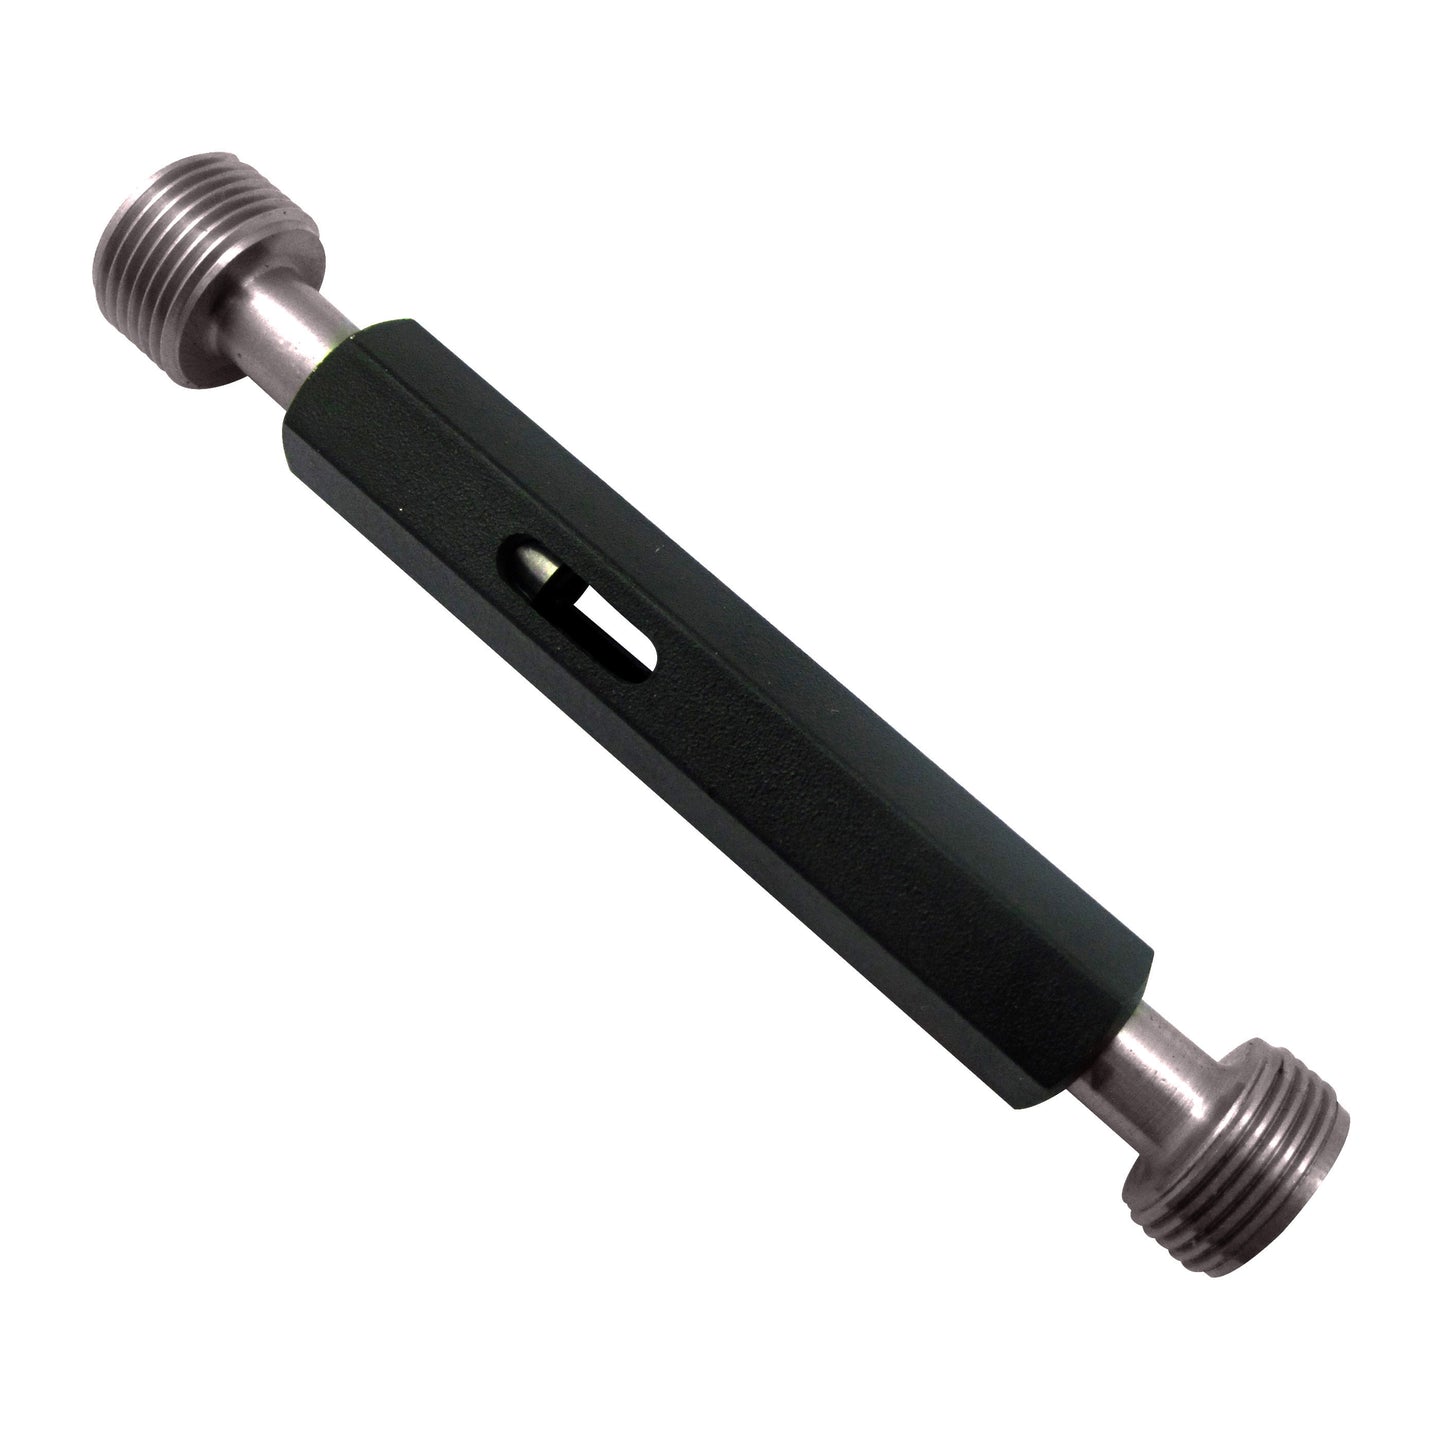 5/8" - 20 Unified Right Hand Thread Plug Gauge